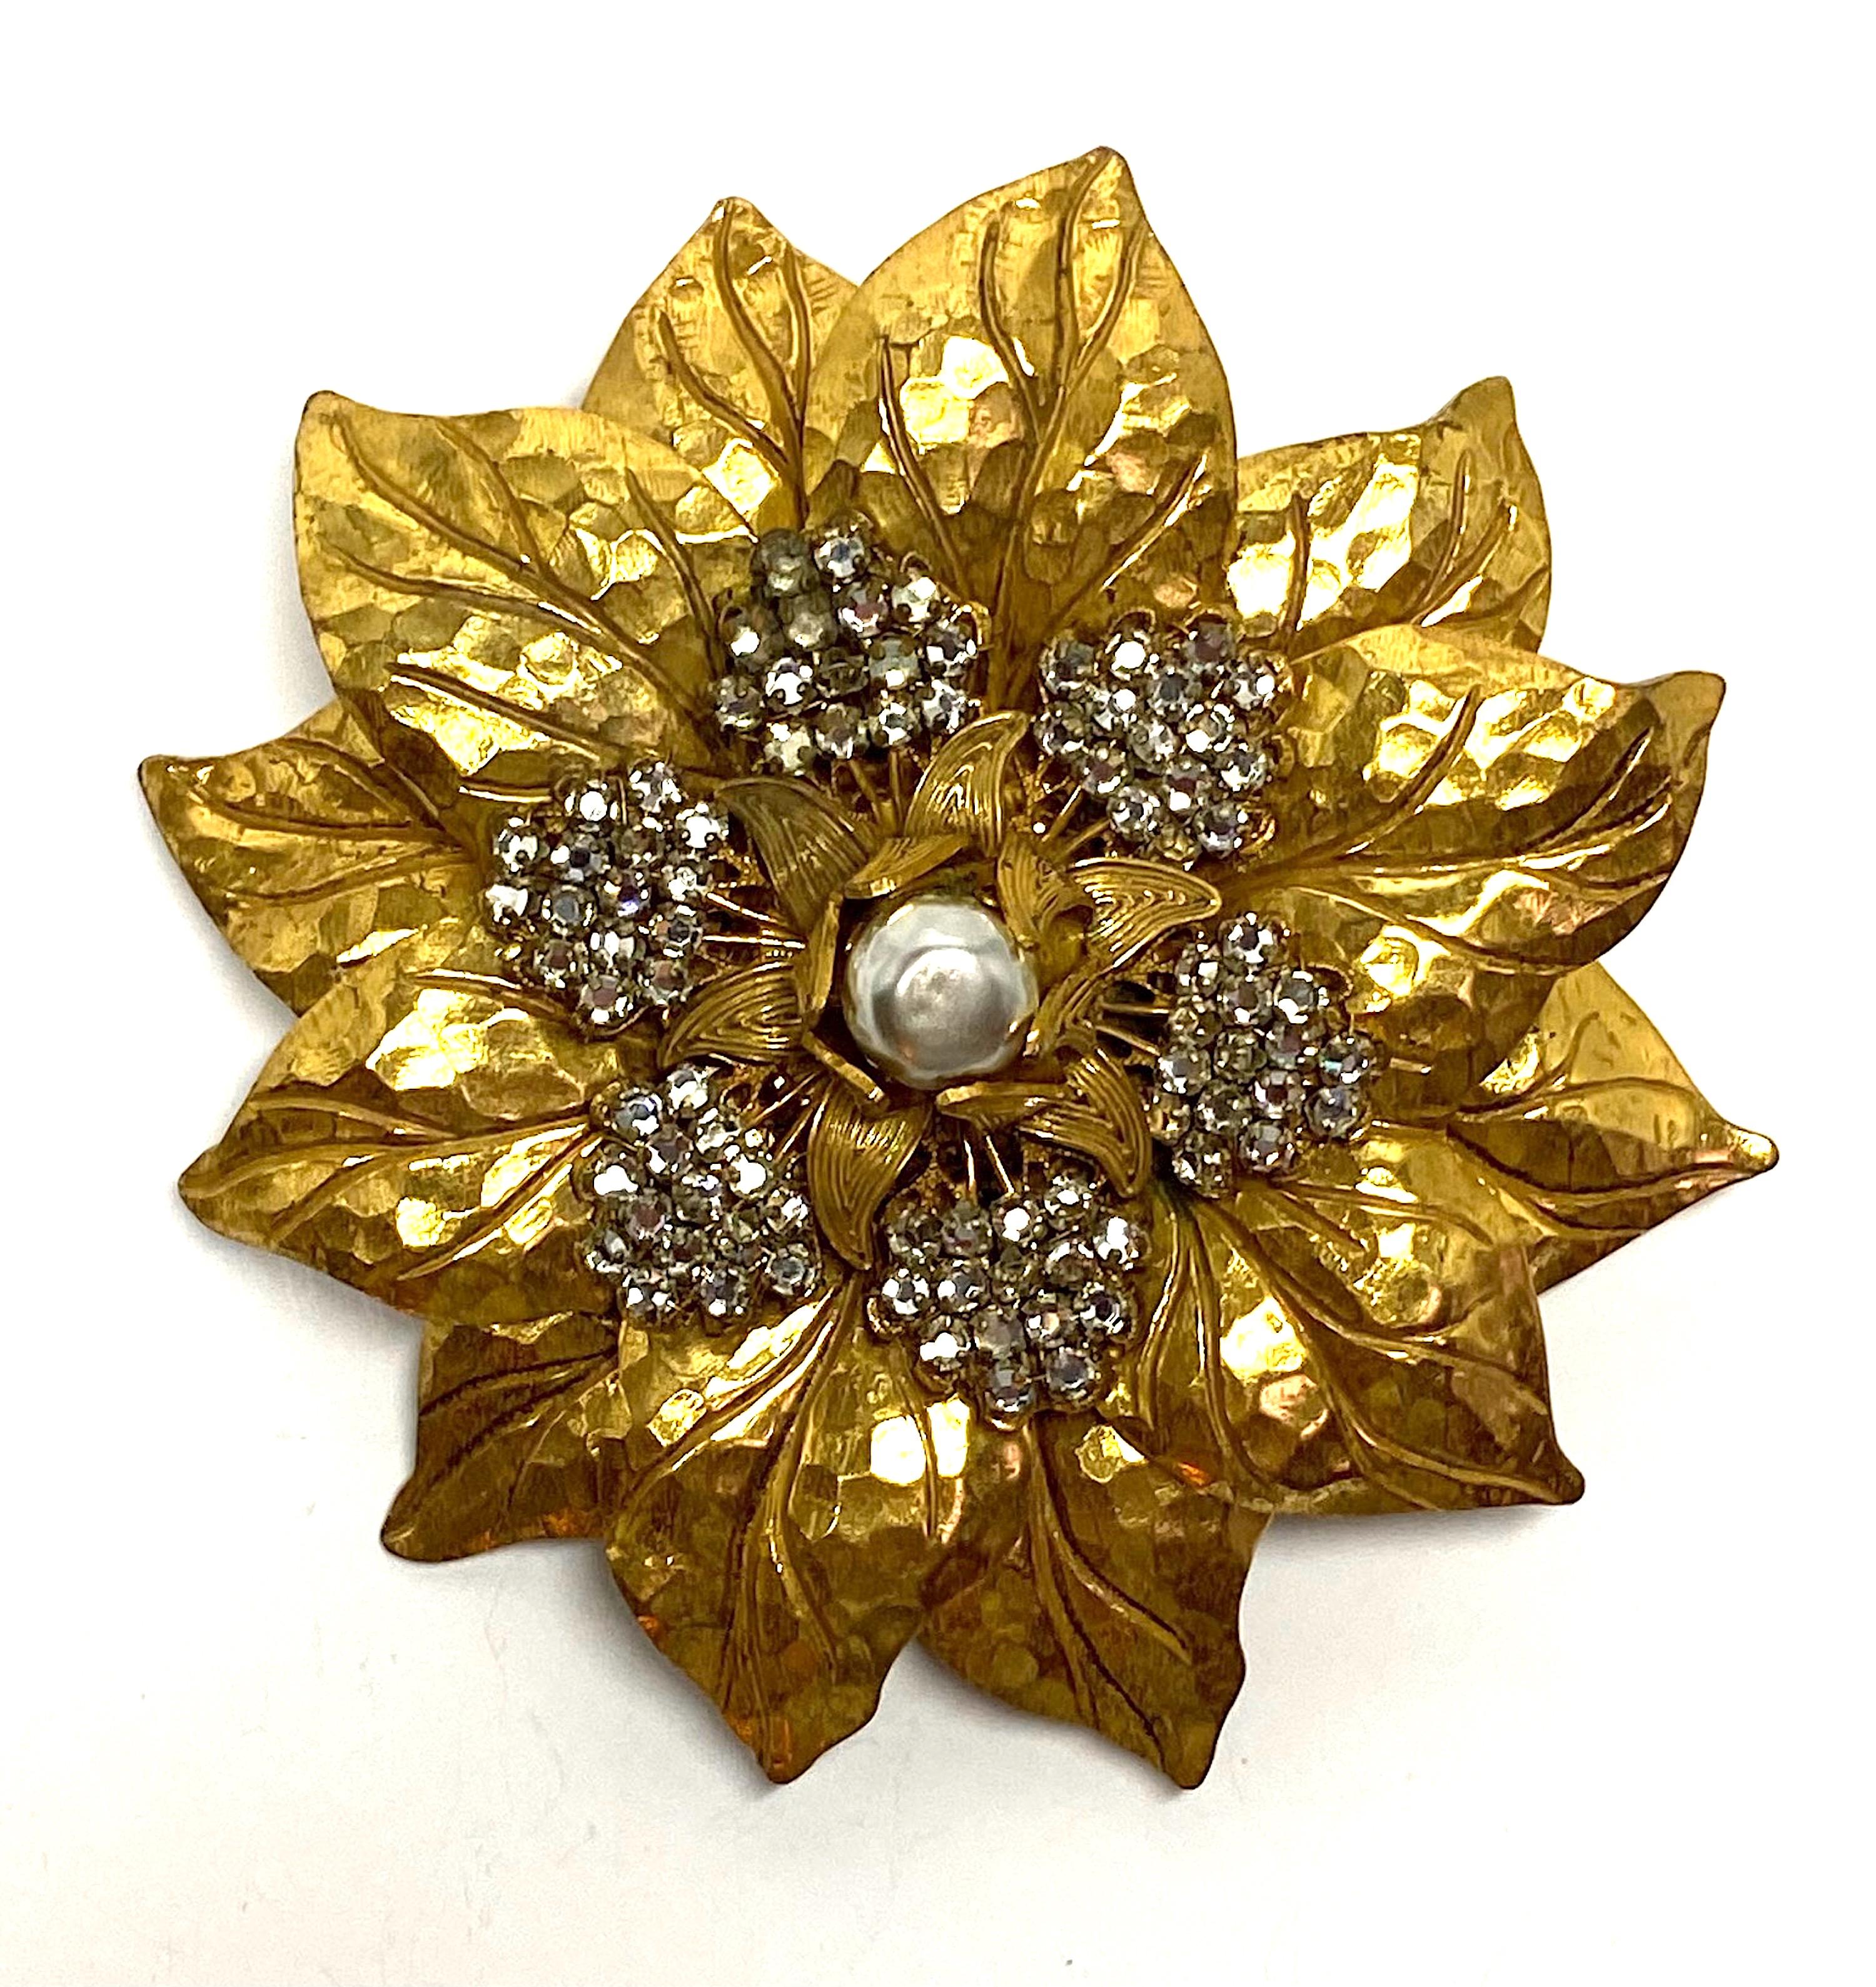 A beautiful and large there dimensional 1950s Miriam Haskell flower brooch. It is 3 inches in diameter. The brooch is  constructed in five stacked layers of floral disks. They are wired together as are the top flat back crystals. The top has a faux